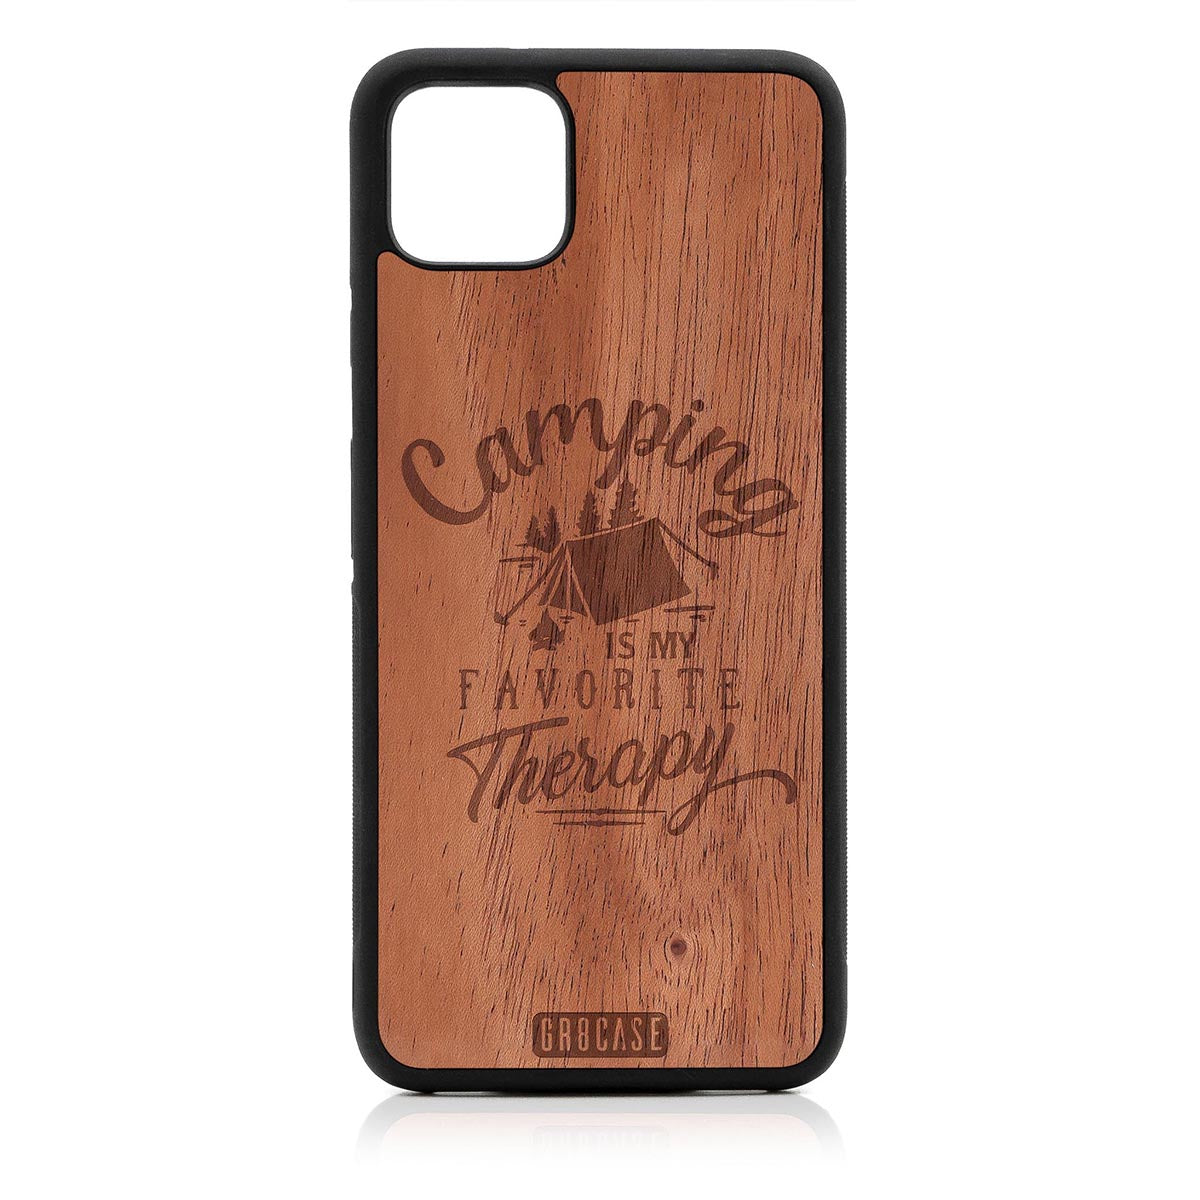 Camping Is My Favorite Therapy Design Wood Case For Google Pixel 4 XL by GR8CASE